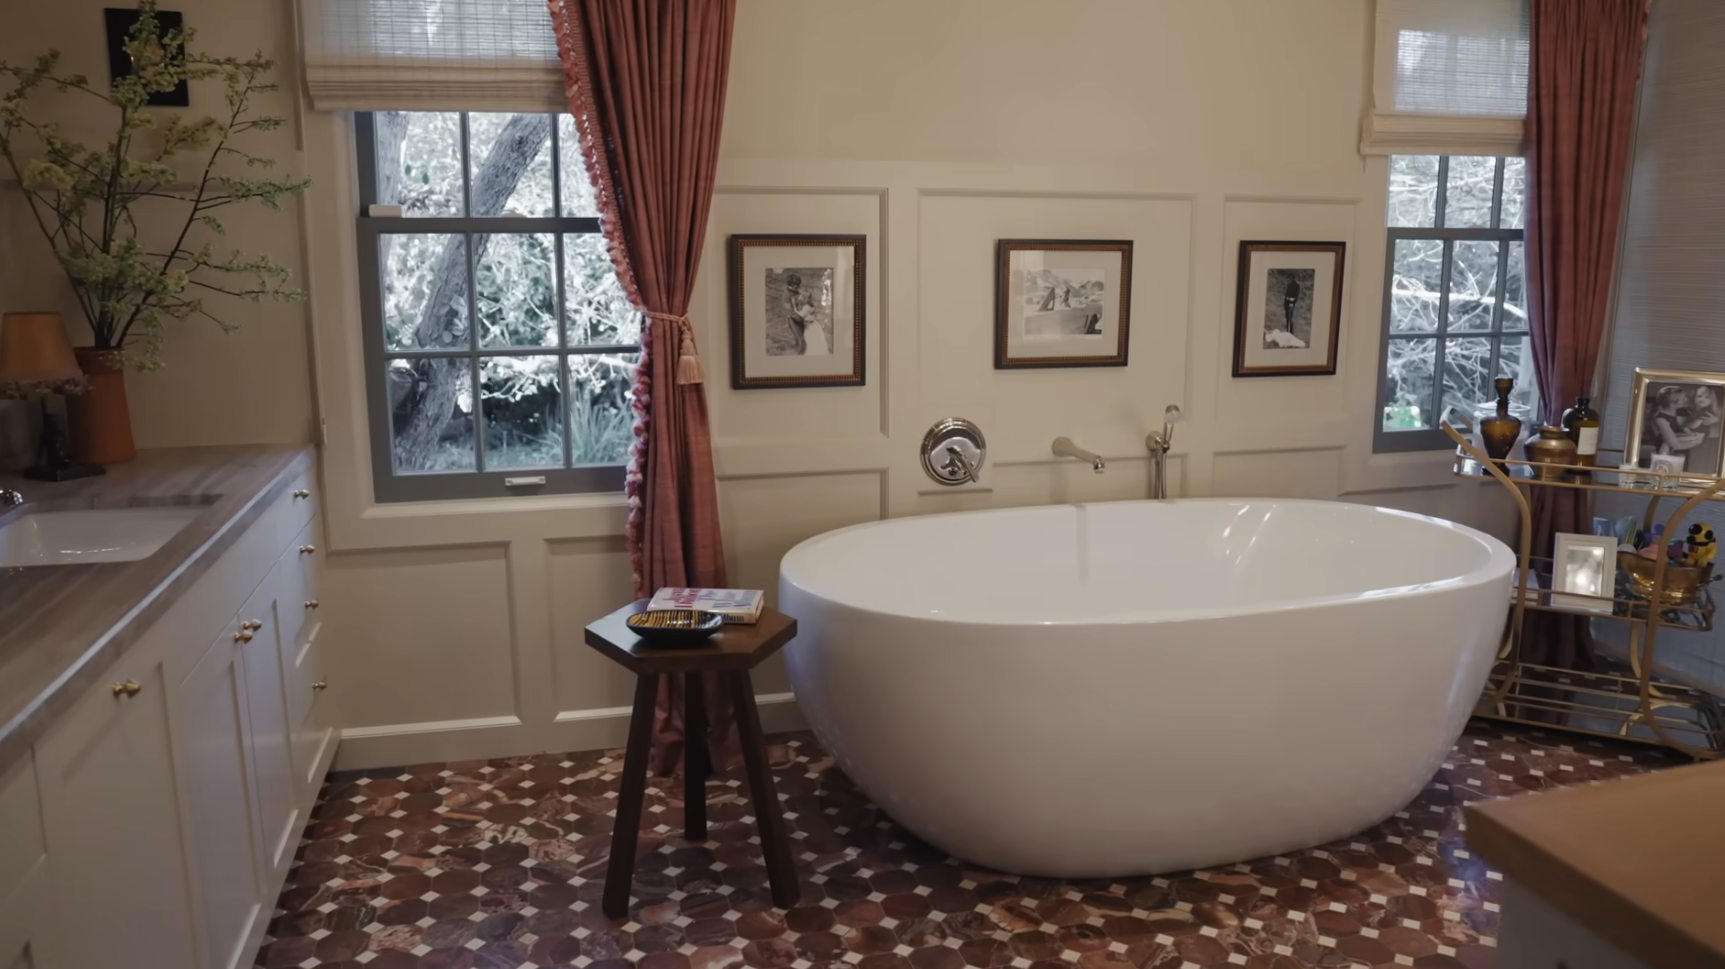 Elegant bathroom with a freestanding tub, framed art on walls, and a view of trees through windows